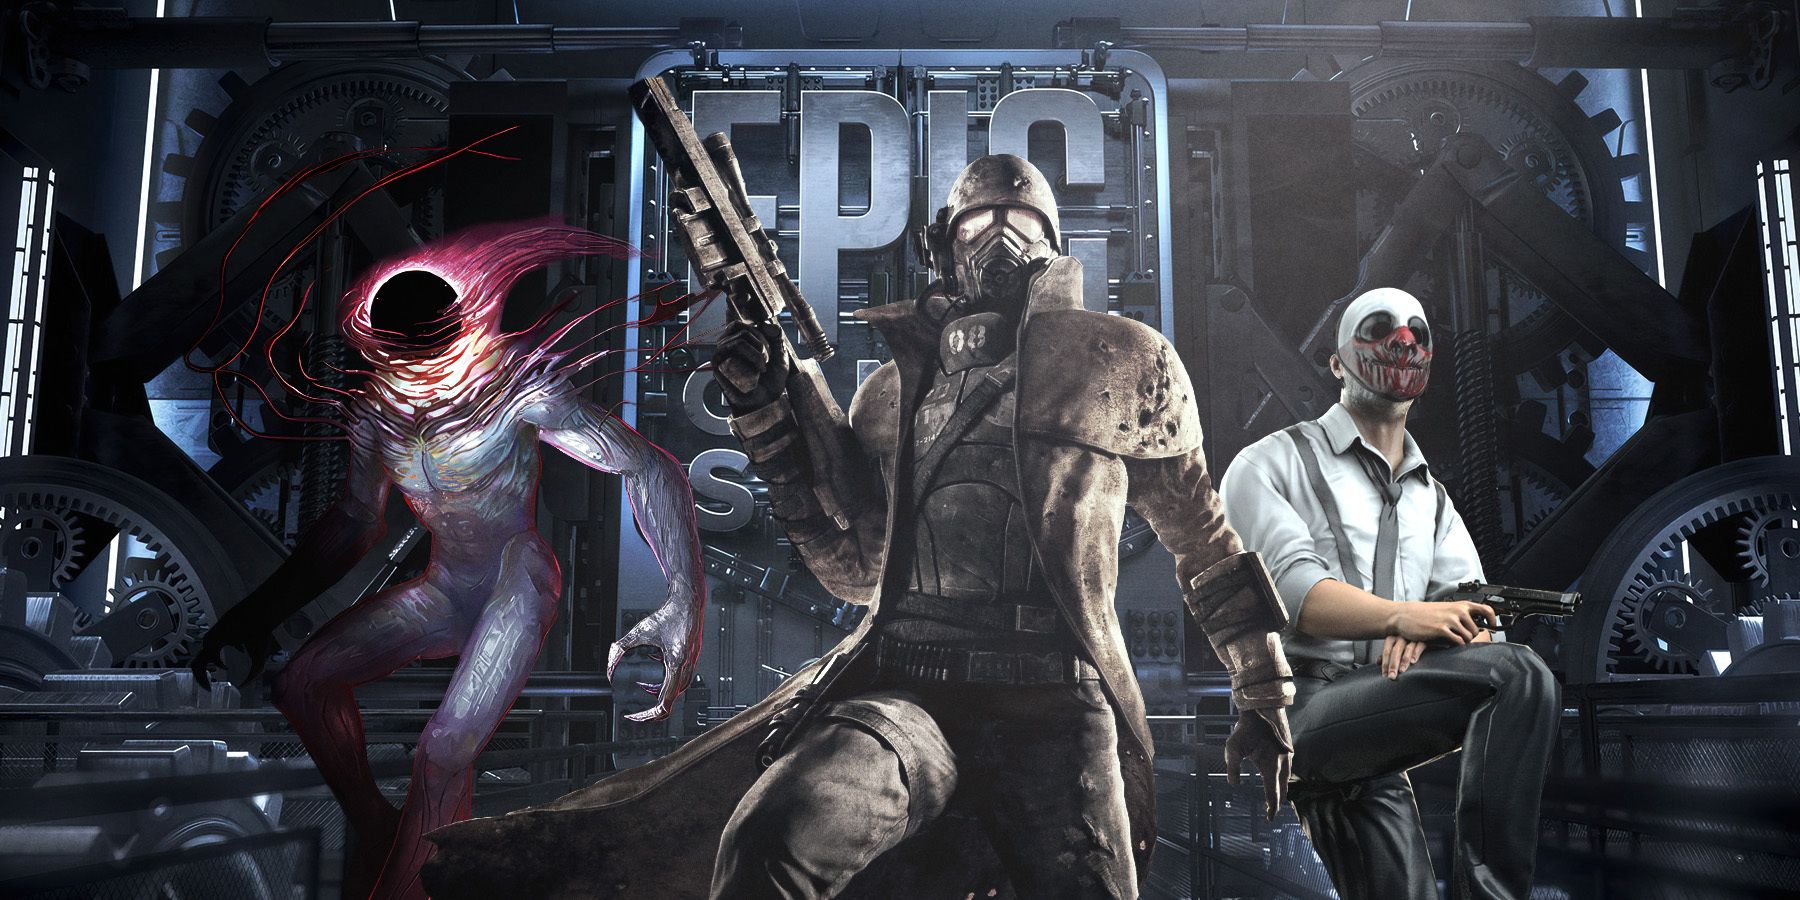 Epic Launches New PC Games Store With Handful of Titles